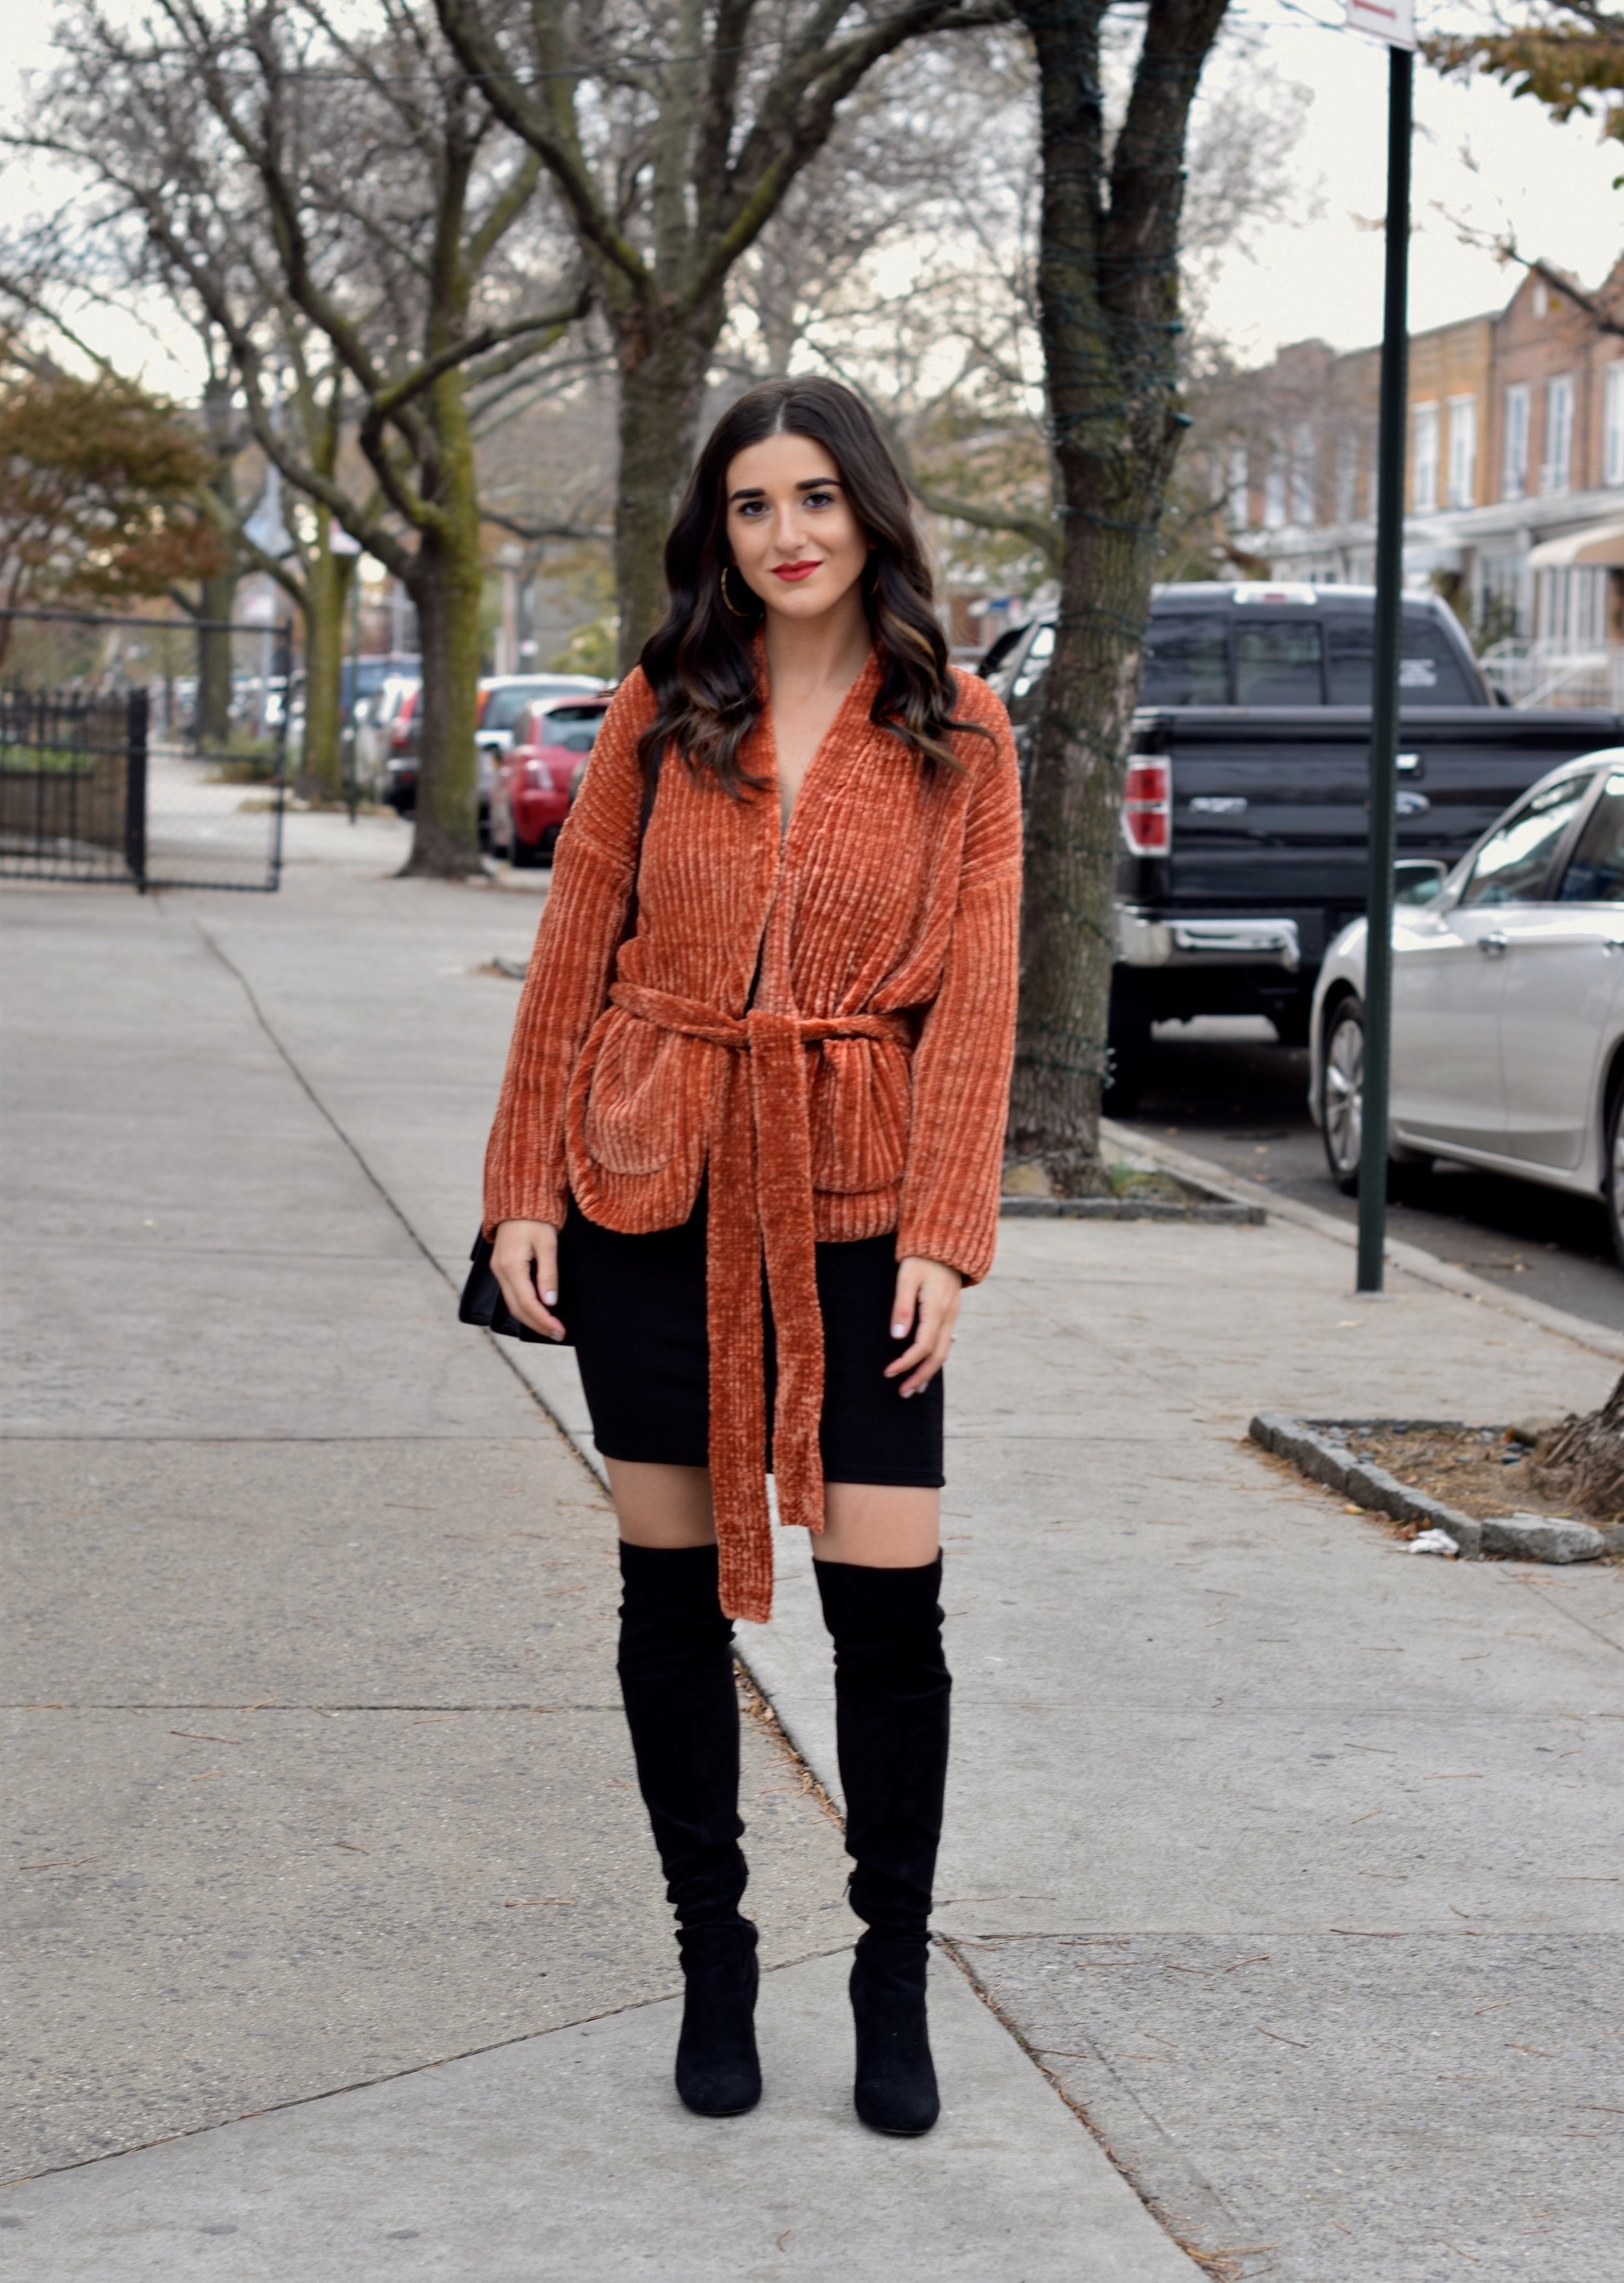 Orange Tie Sweater OTK Boots 10 Sweaters That Make The Perfect Holiday Gifts Esther Santer Fashion Blog NYC Street Style Blogger Outfit OOTD Trendy Urban Outfitters Girl Women Black Over The Knee  Boots Slip Dress Beautiful New York City Cozy OOTD.jpg